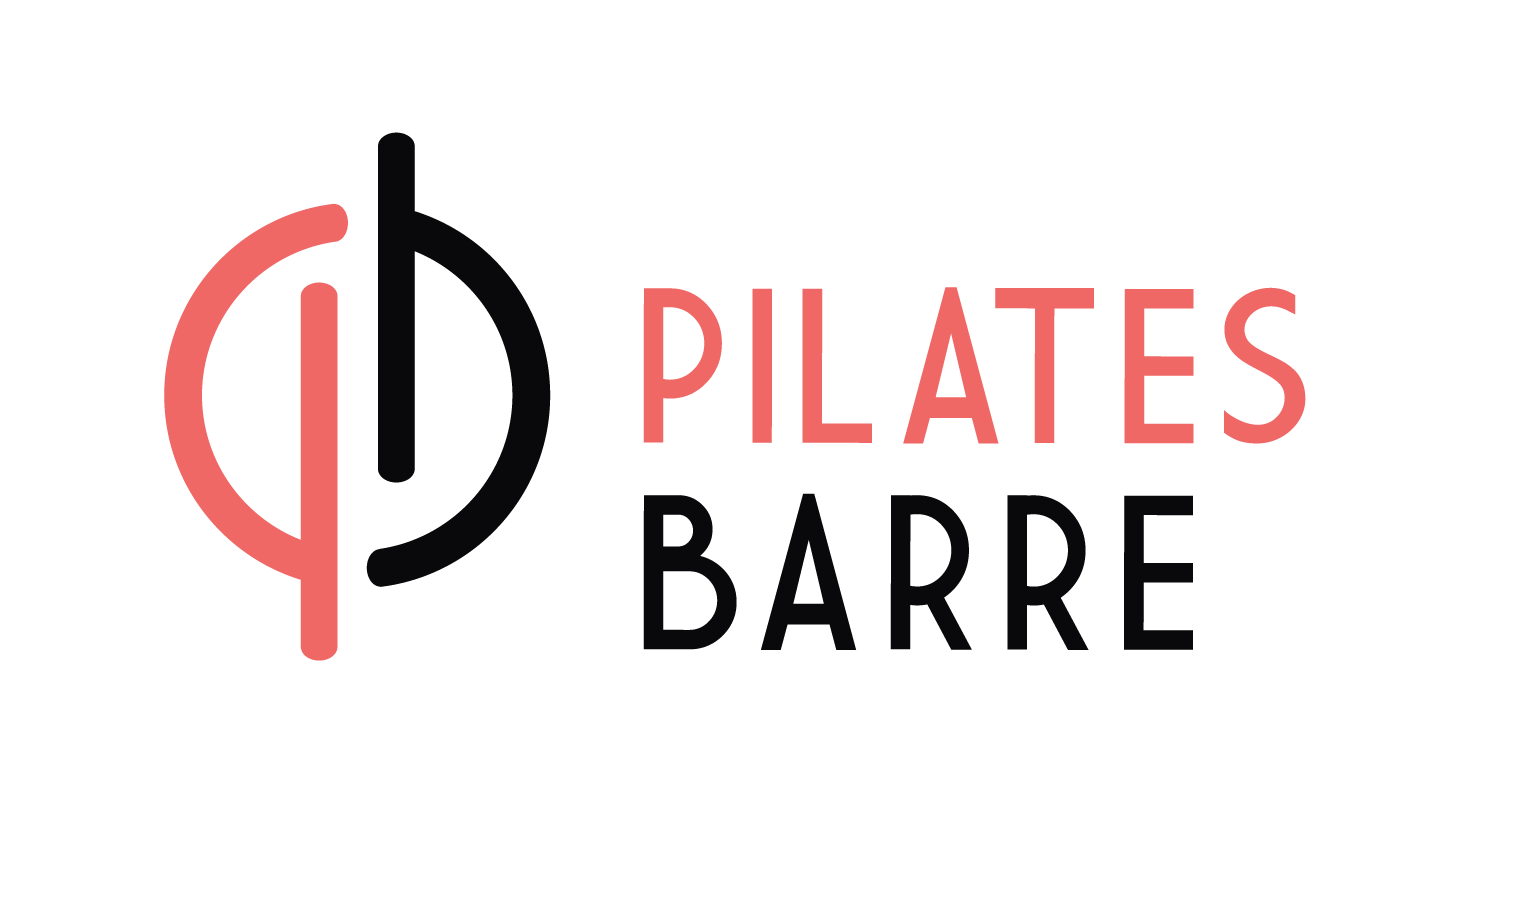 The Pilates Barre